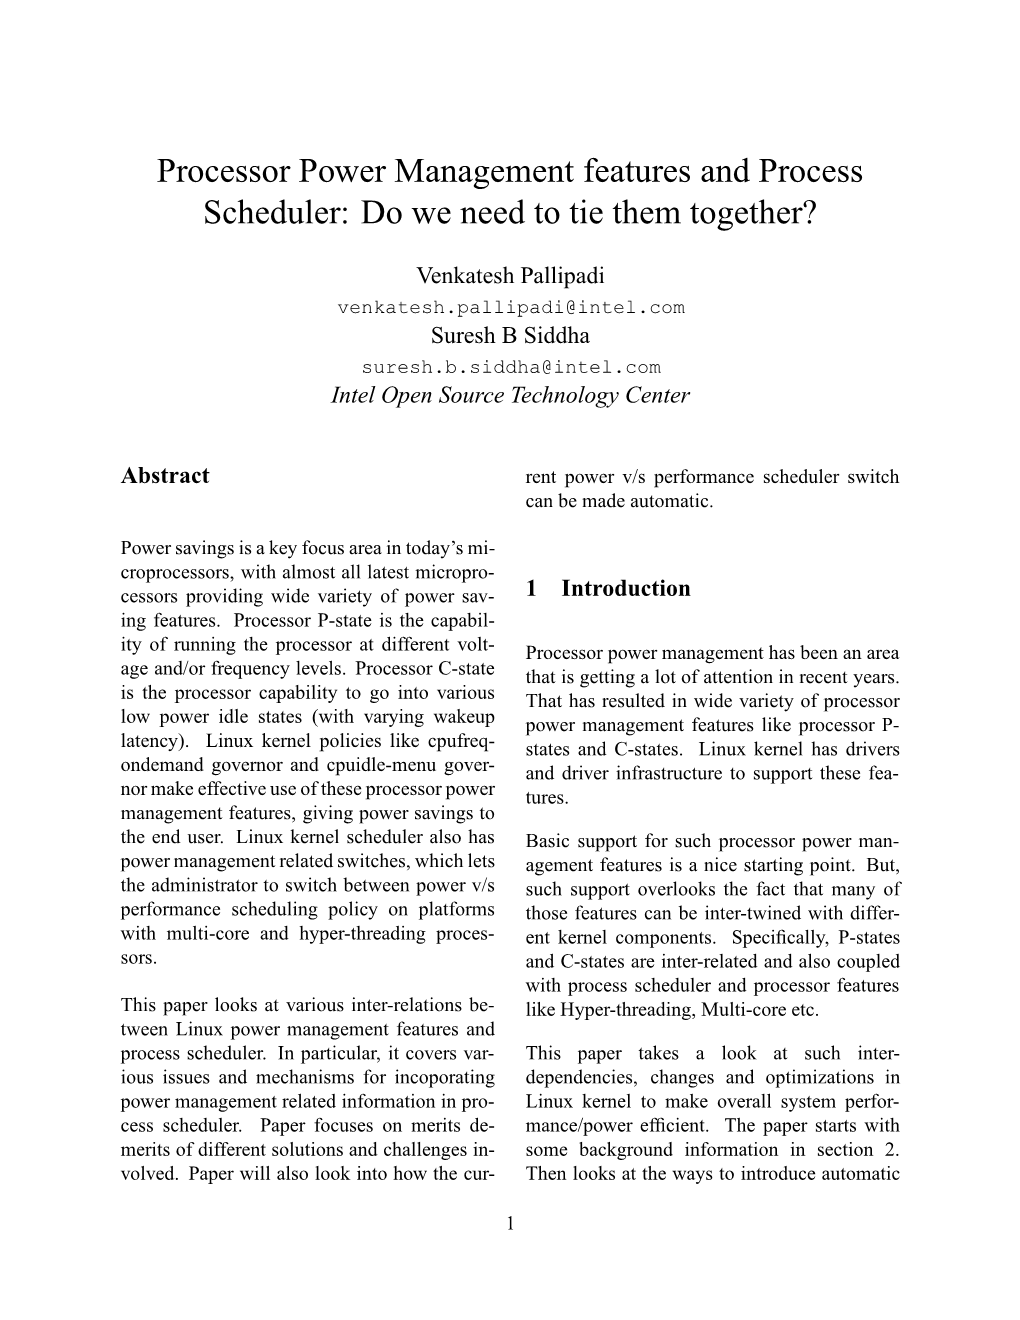 Processor Power Management Features and Process Scheduler: Do We Need to Tie Them Together?